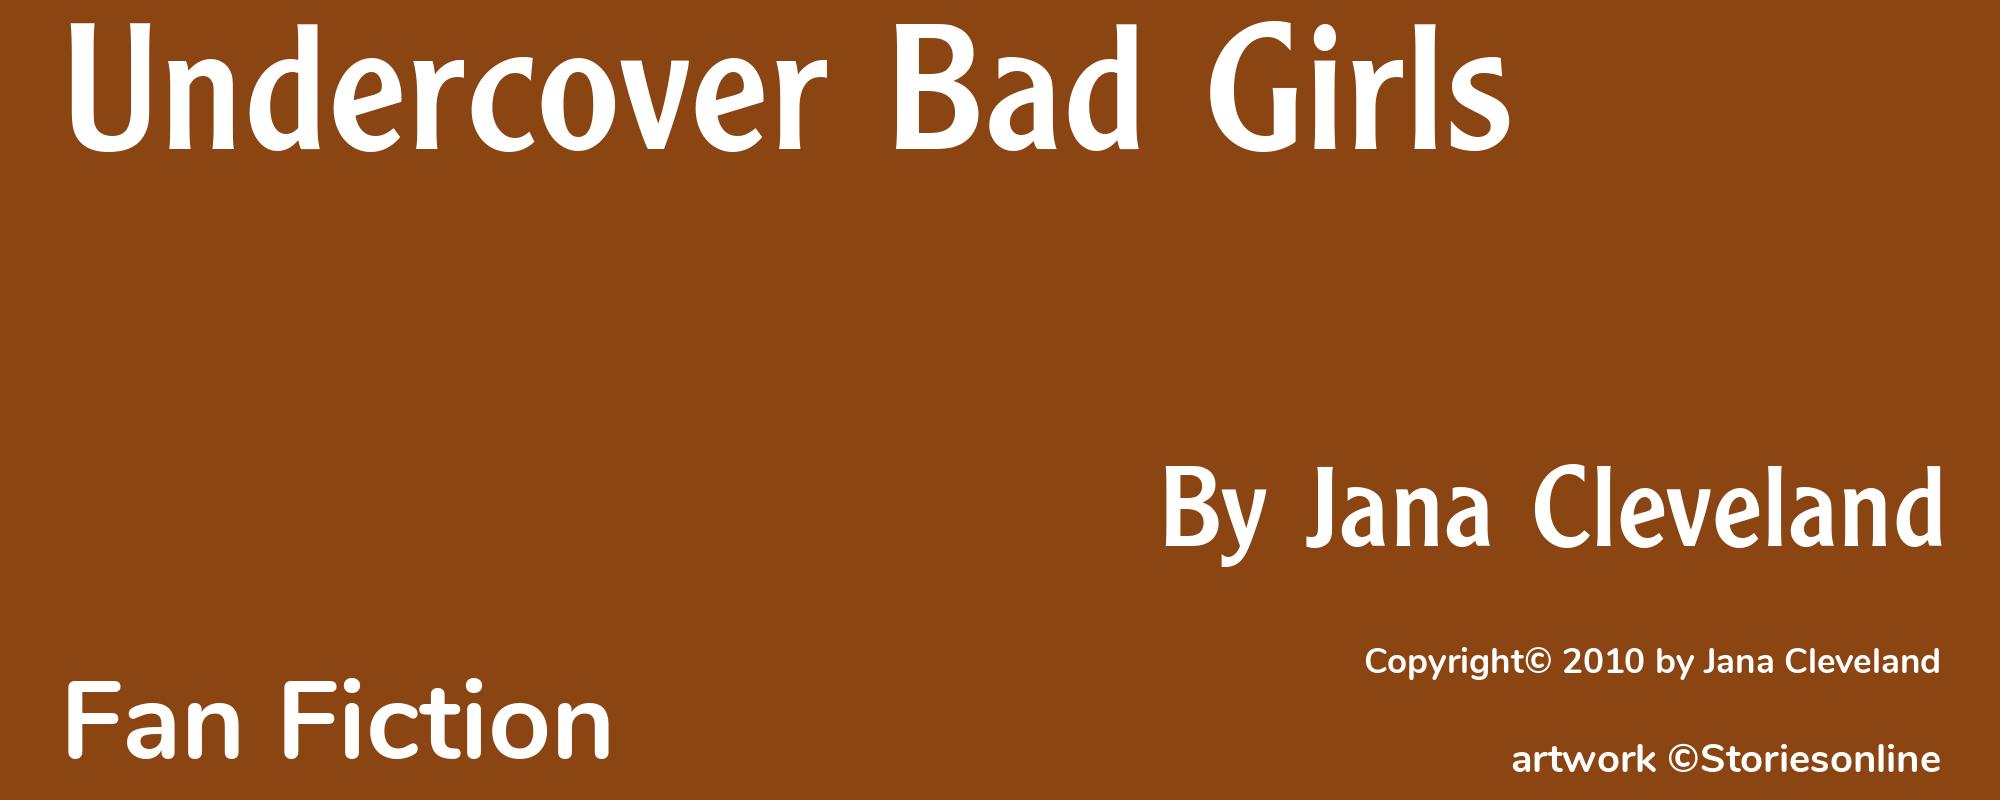 Undercover Bad Girls - Cover